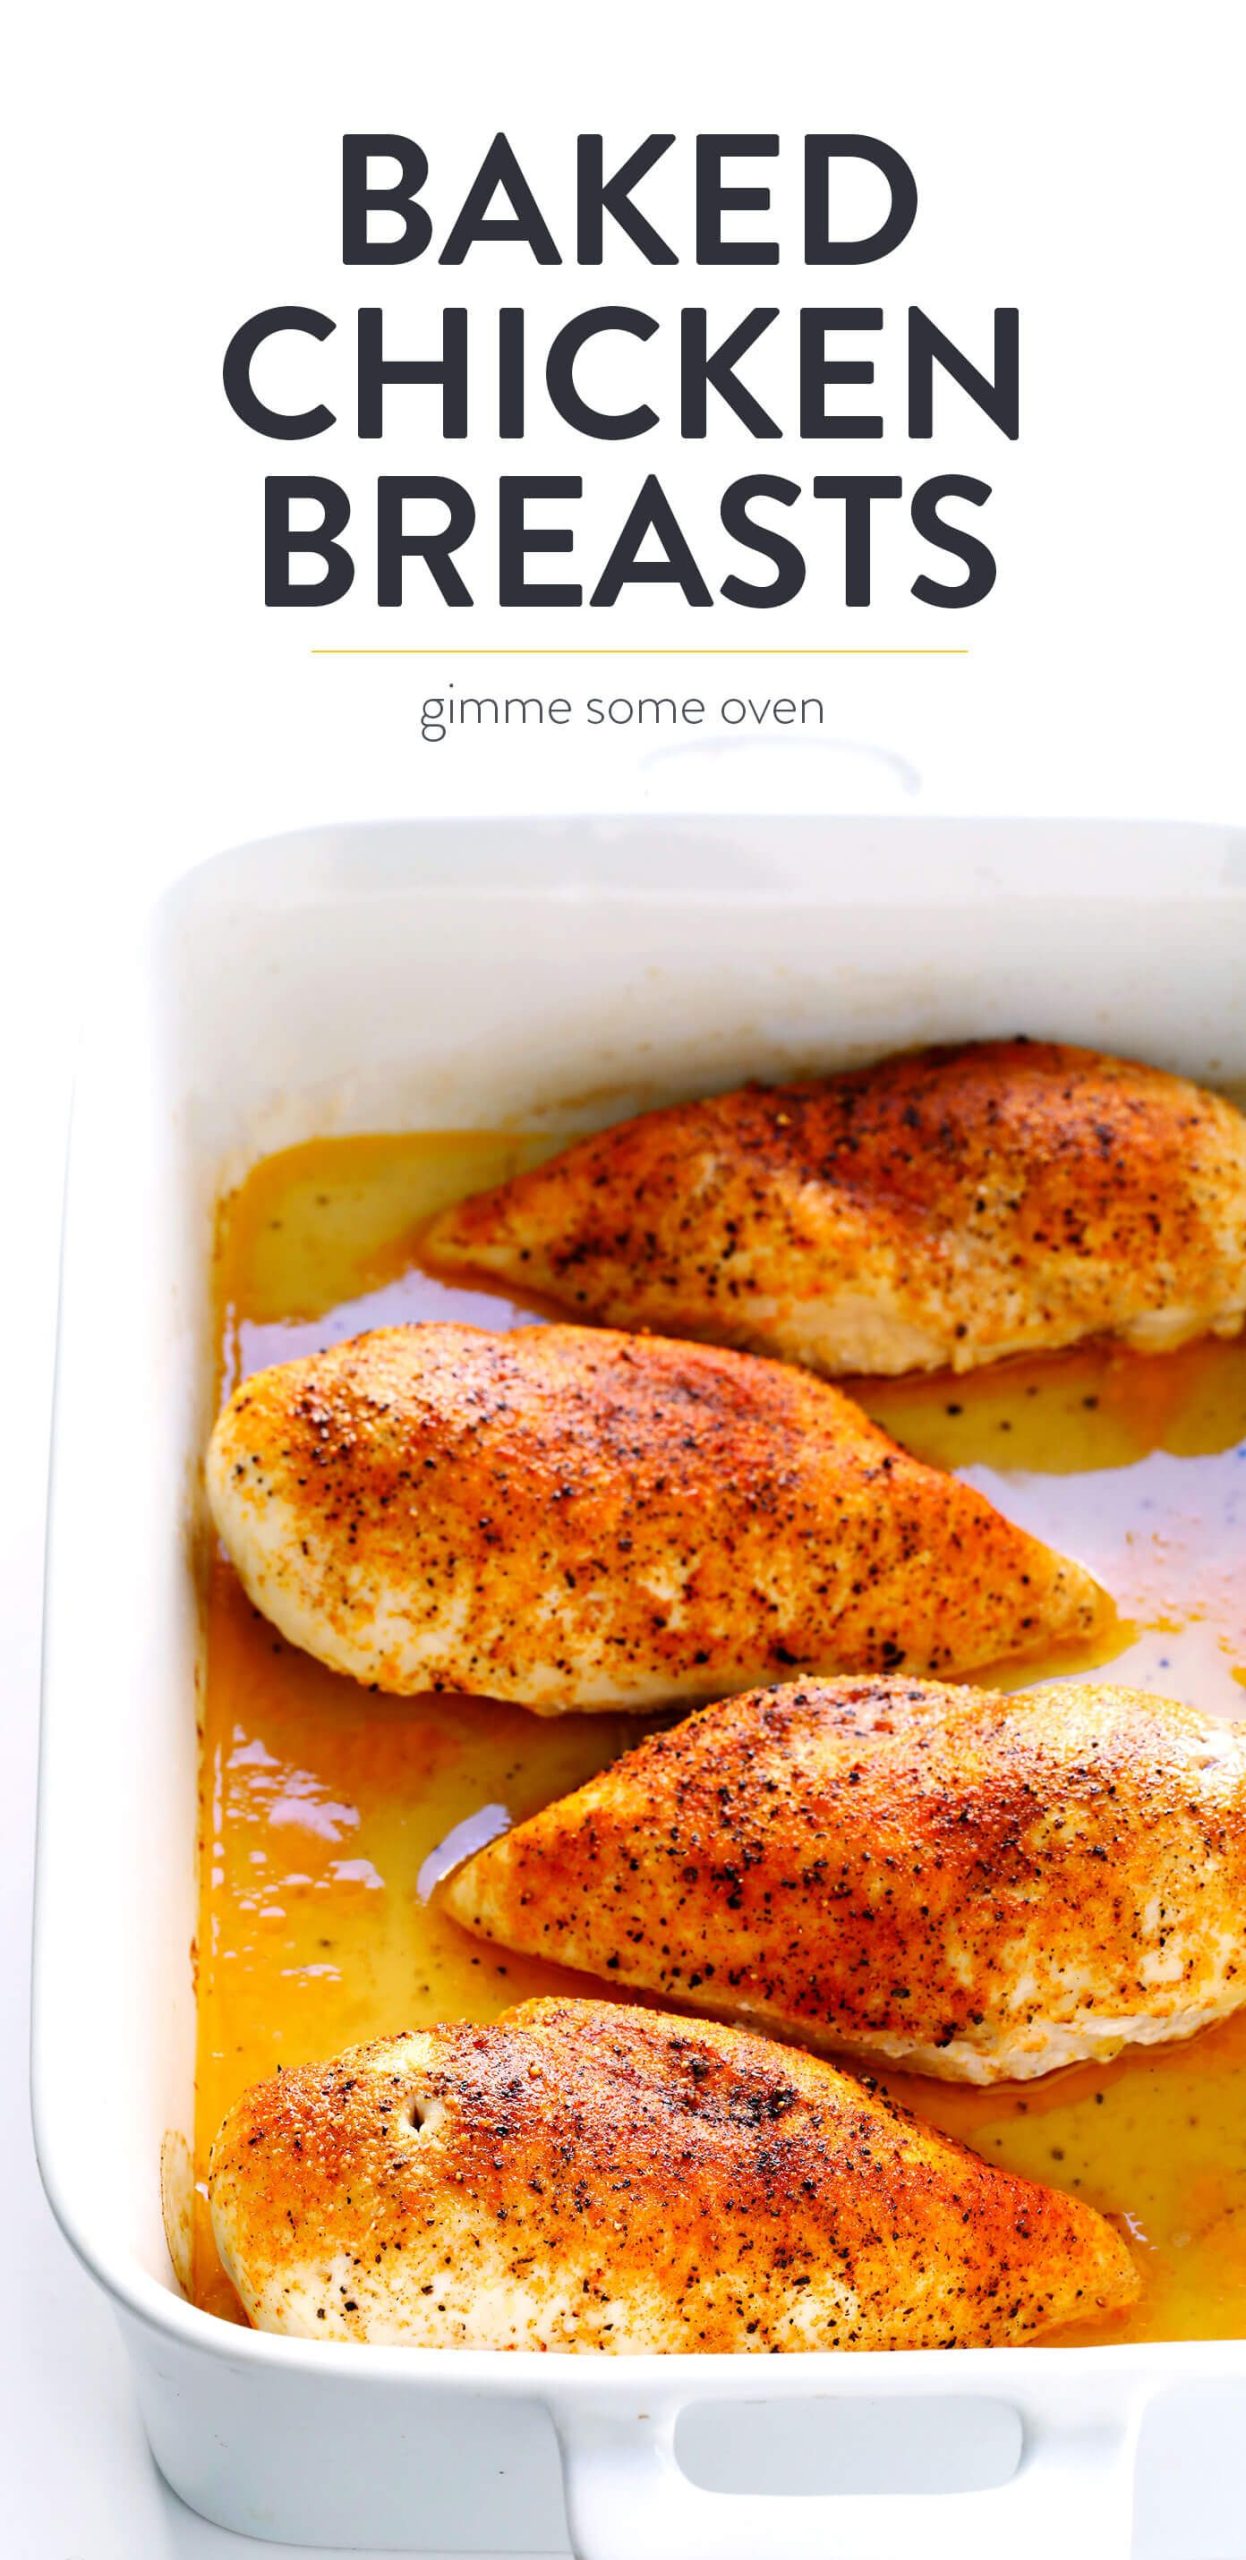 What Can You Make For Dinner With Chicken Breast